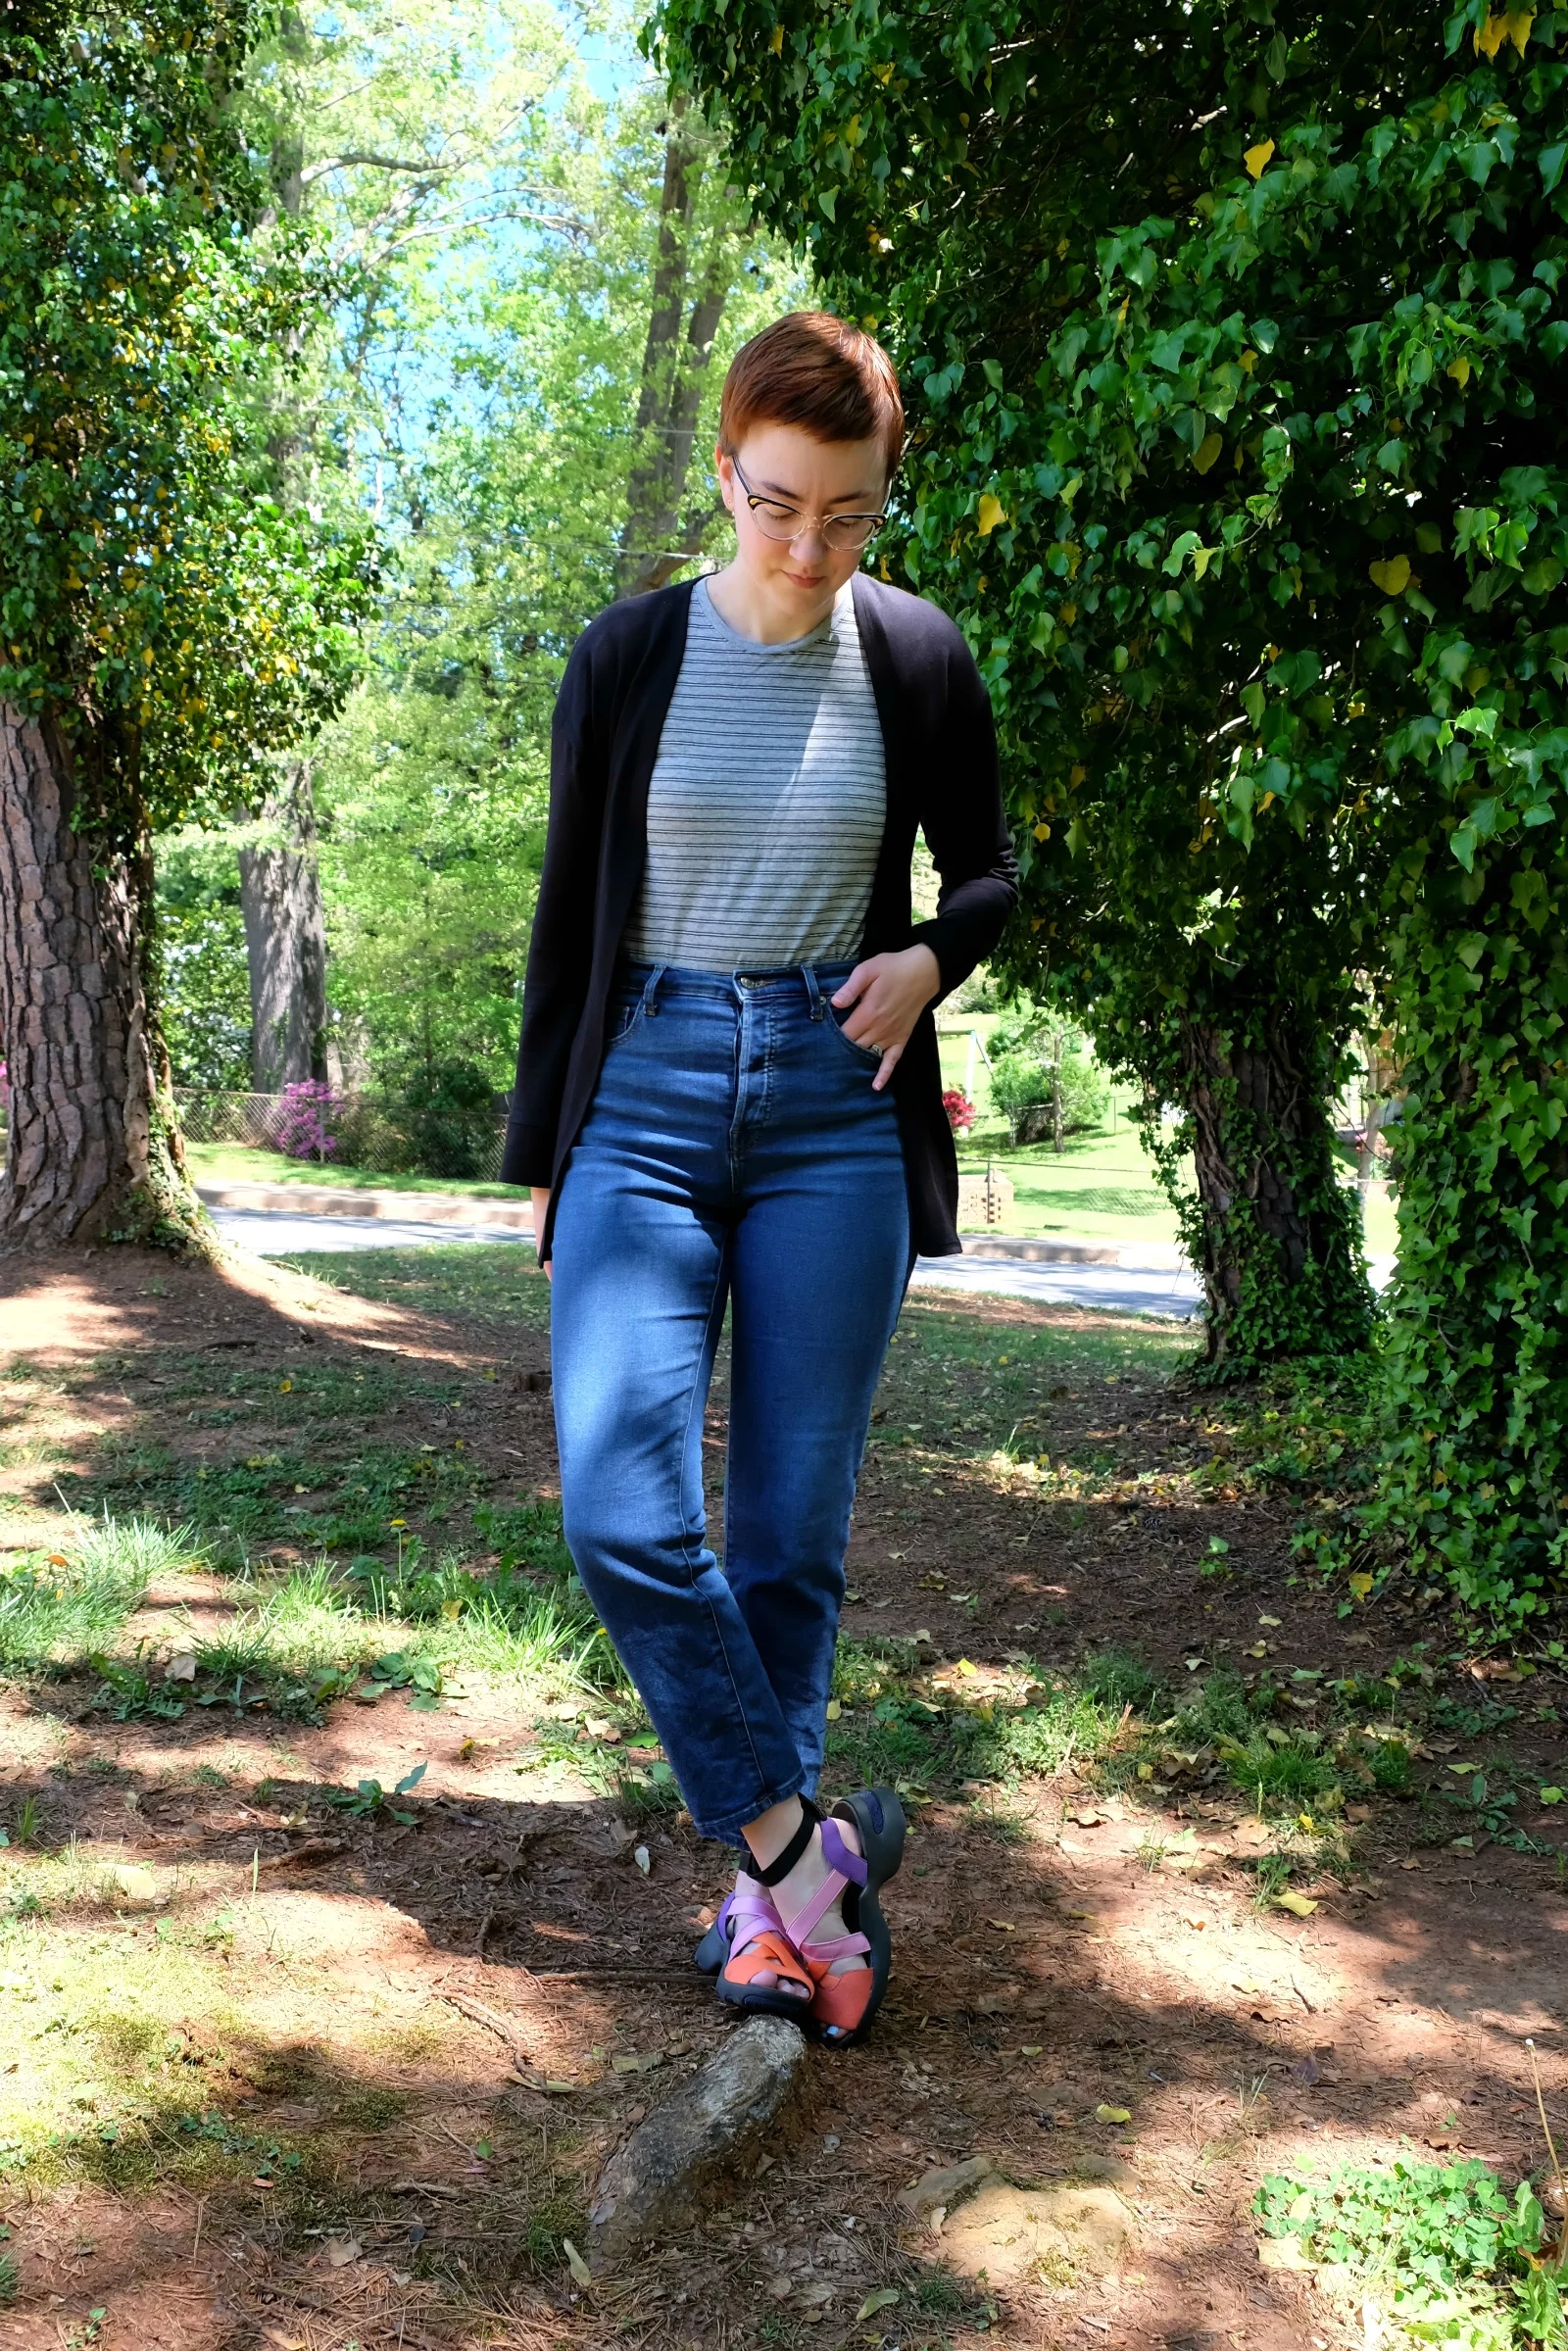  Ethical Details: Cardigan - c/o  LA Relaxed ; Tee and Jeans -  Everlane ; Sandals - secondhand Camper; Earrings -  Bario Neal  